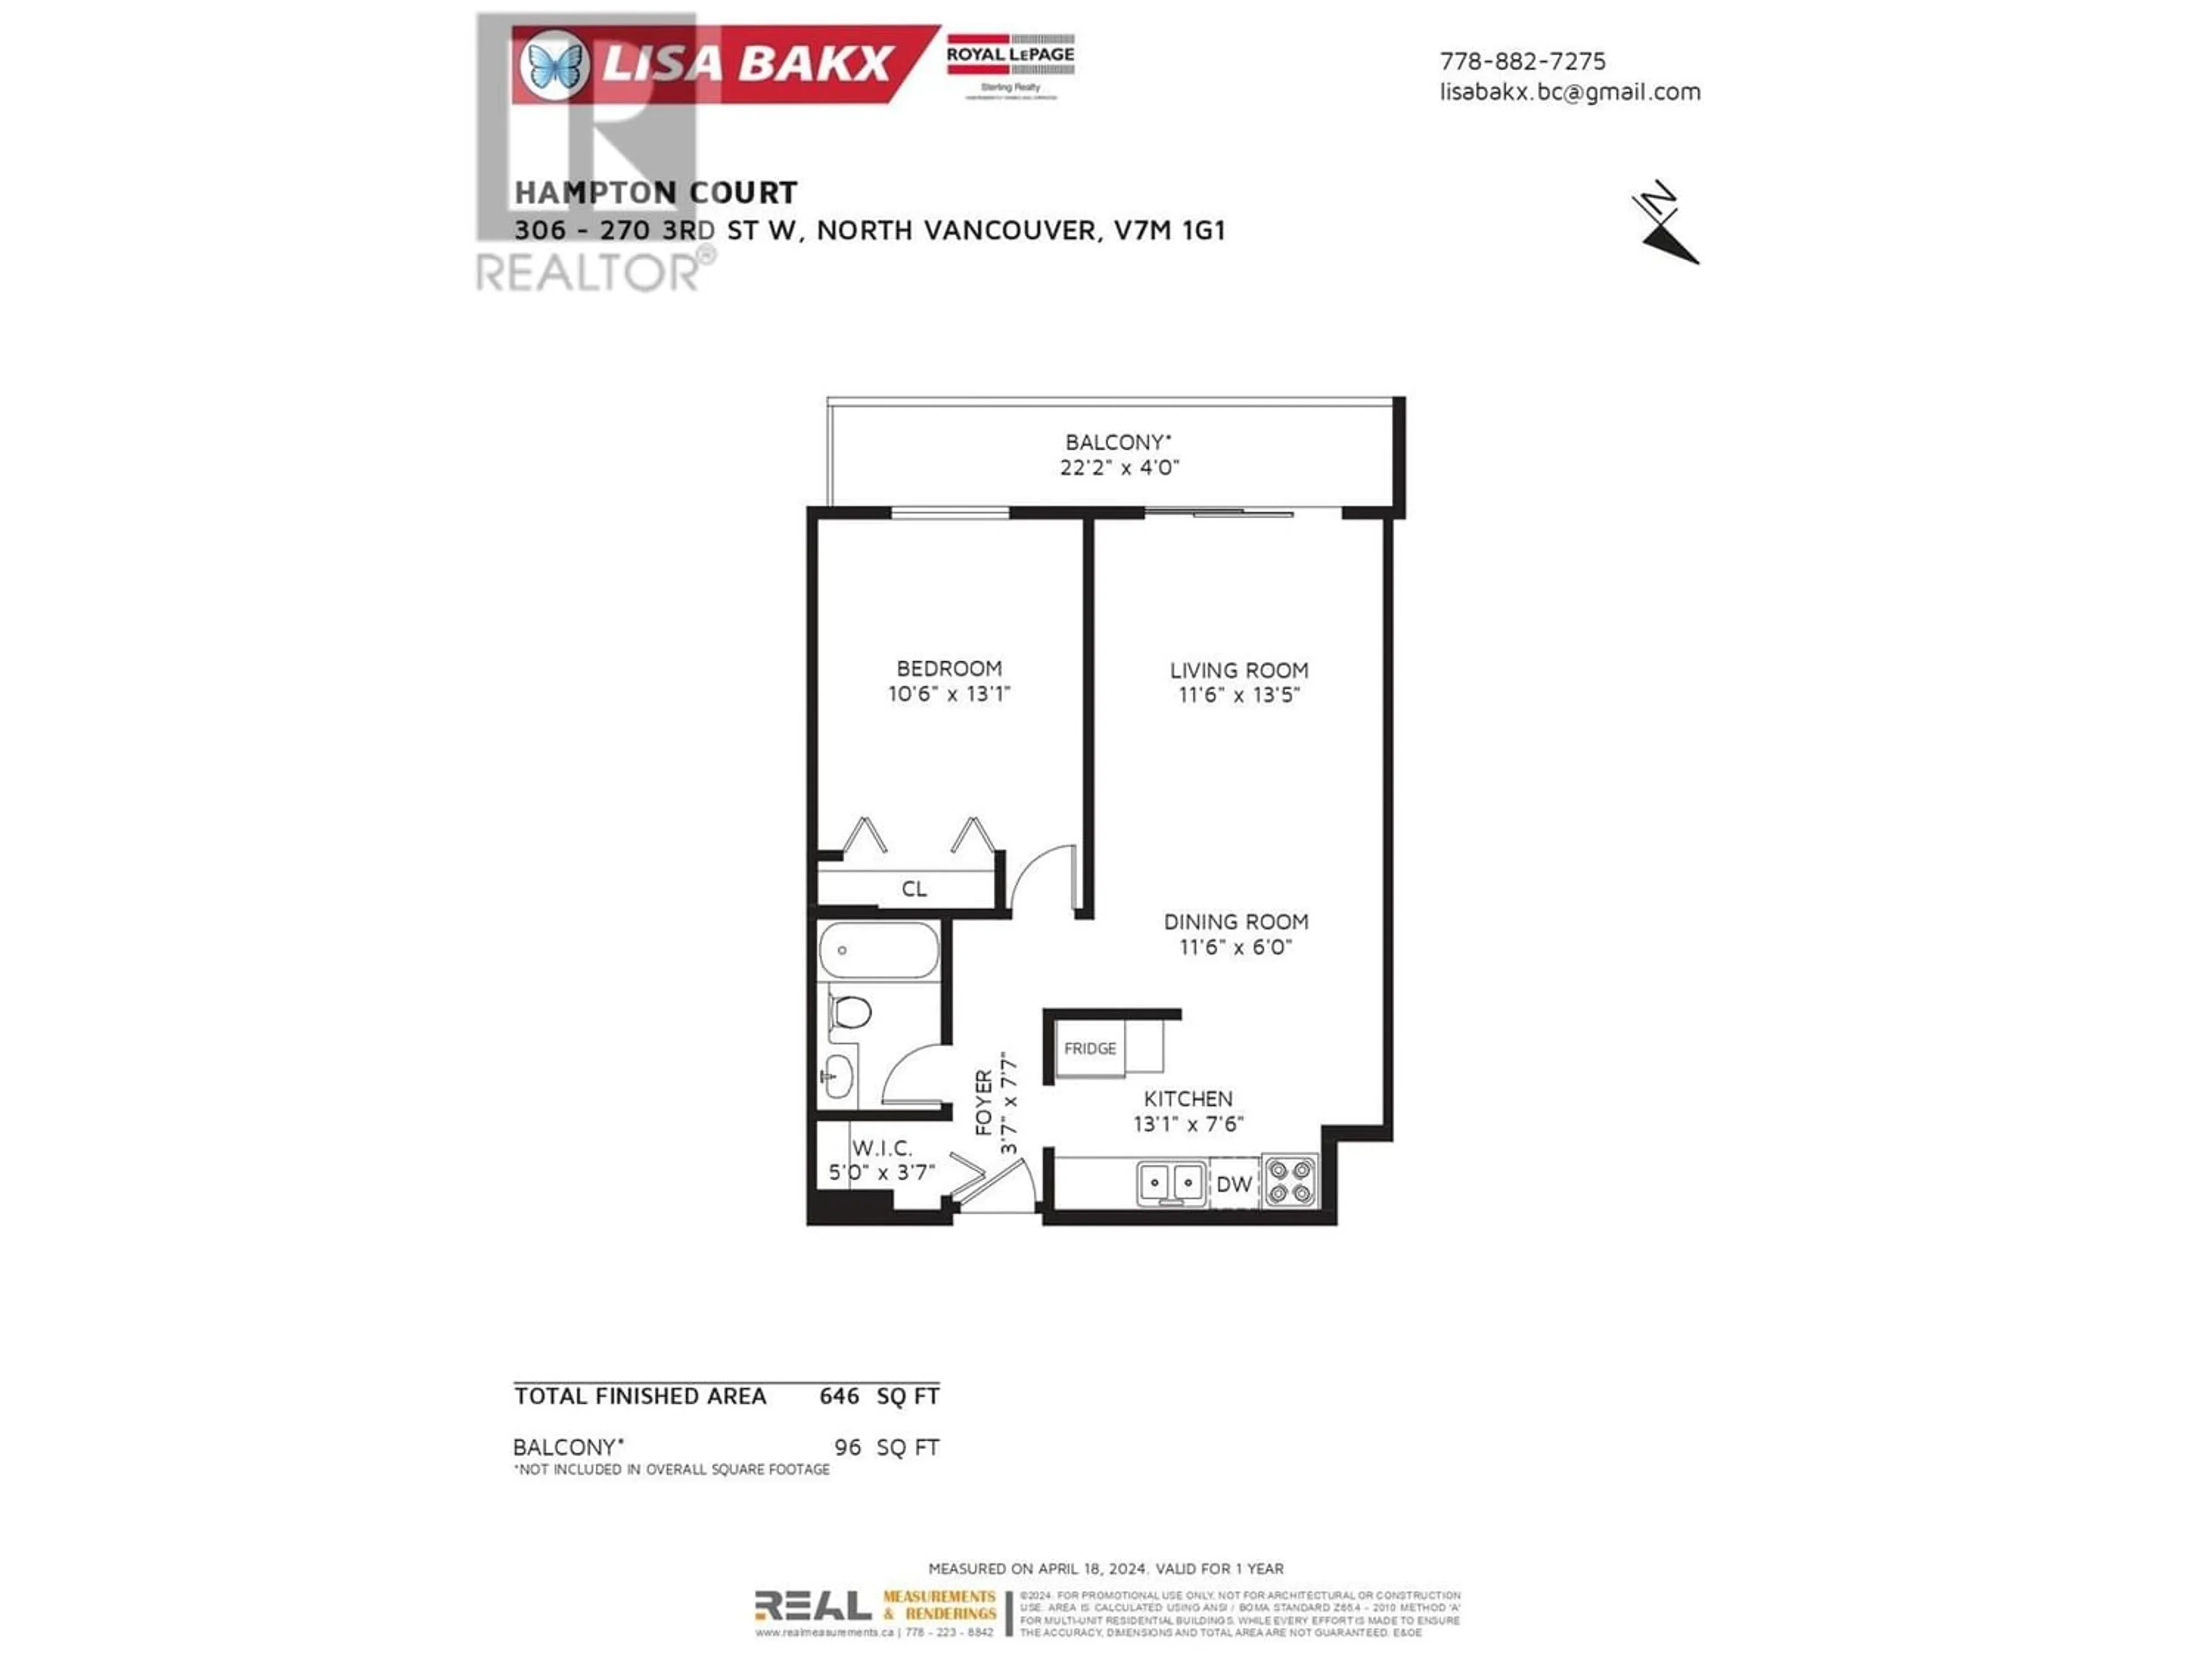 Floor plan for 306 270 W 3RD STREET, North Vancouver British Columbia V7M1G1